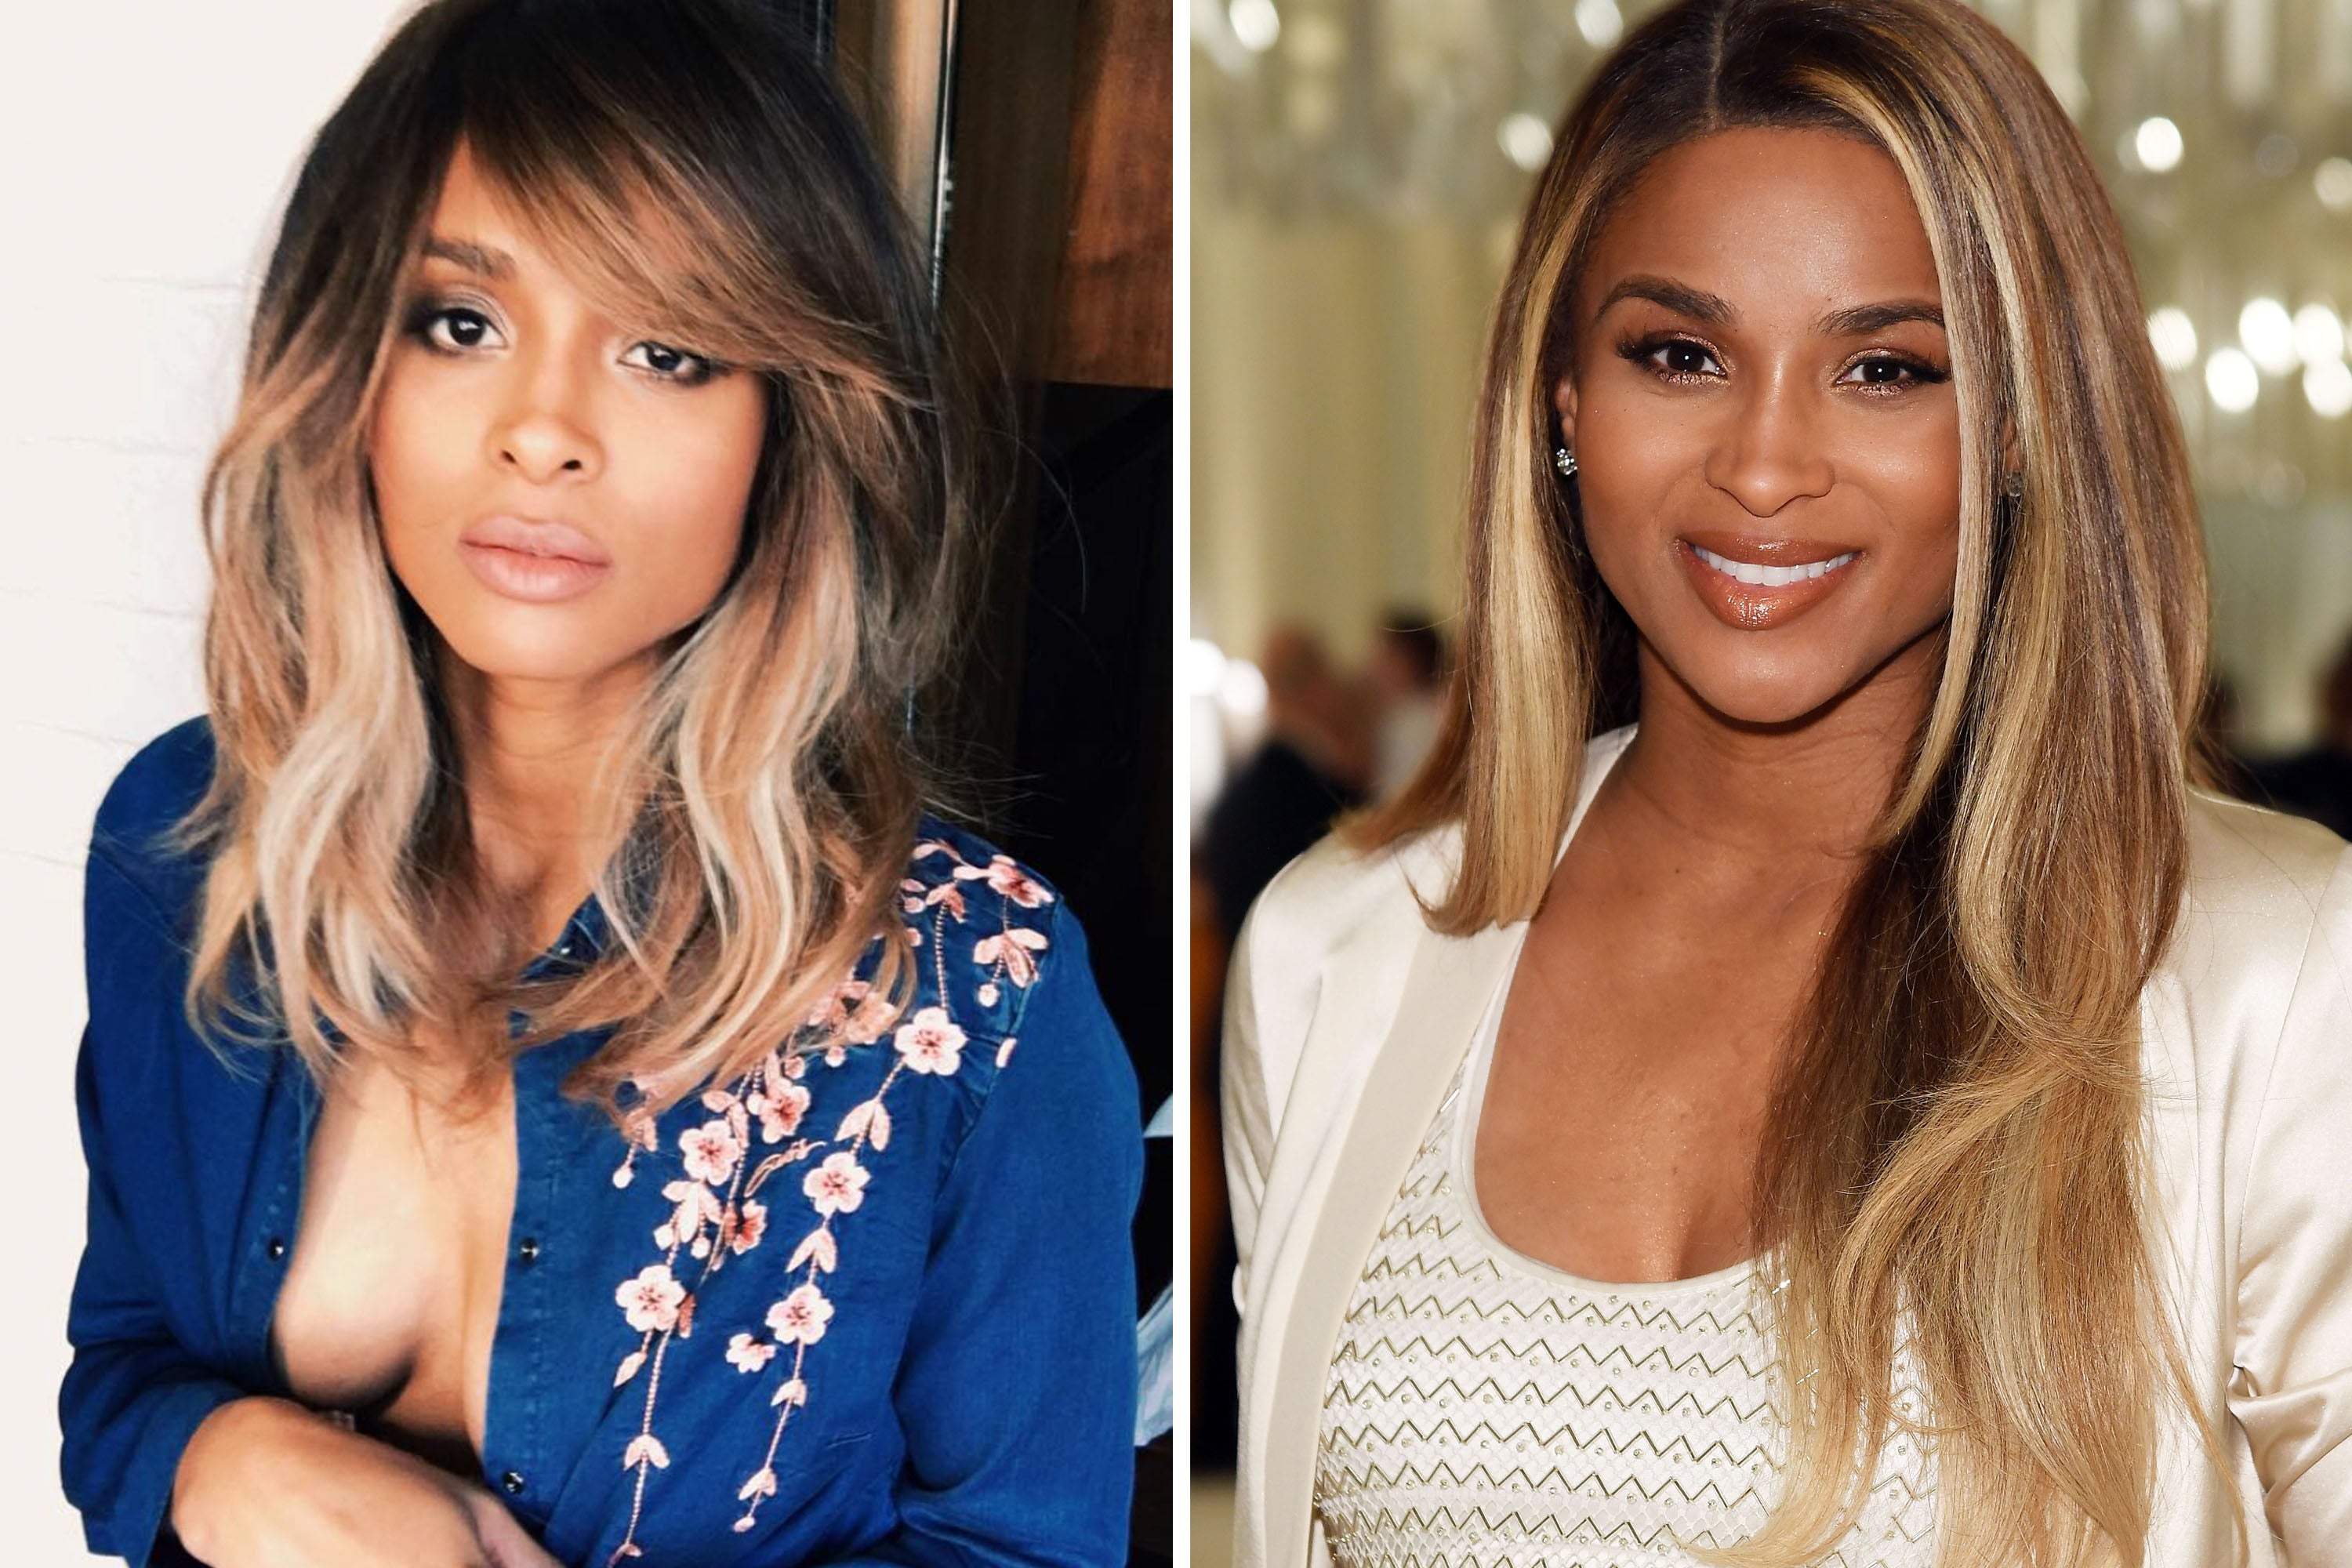 The Biggest and Boldest Celebrity Hair Transformations of 2017 So Far
